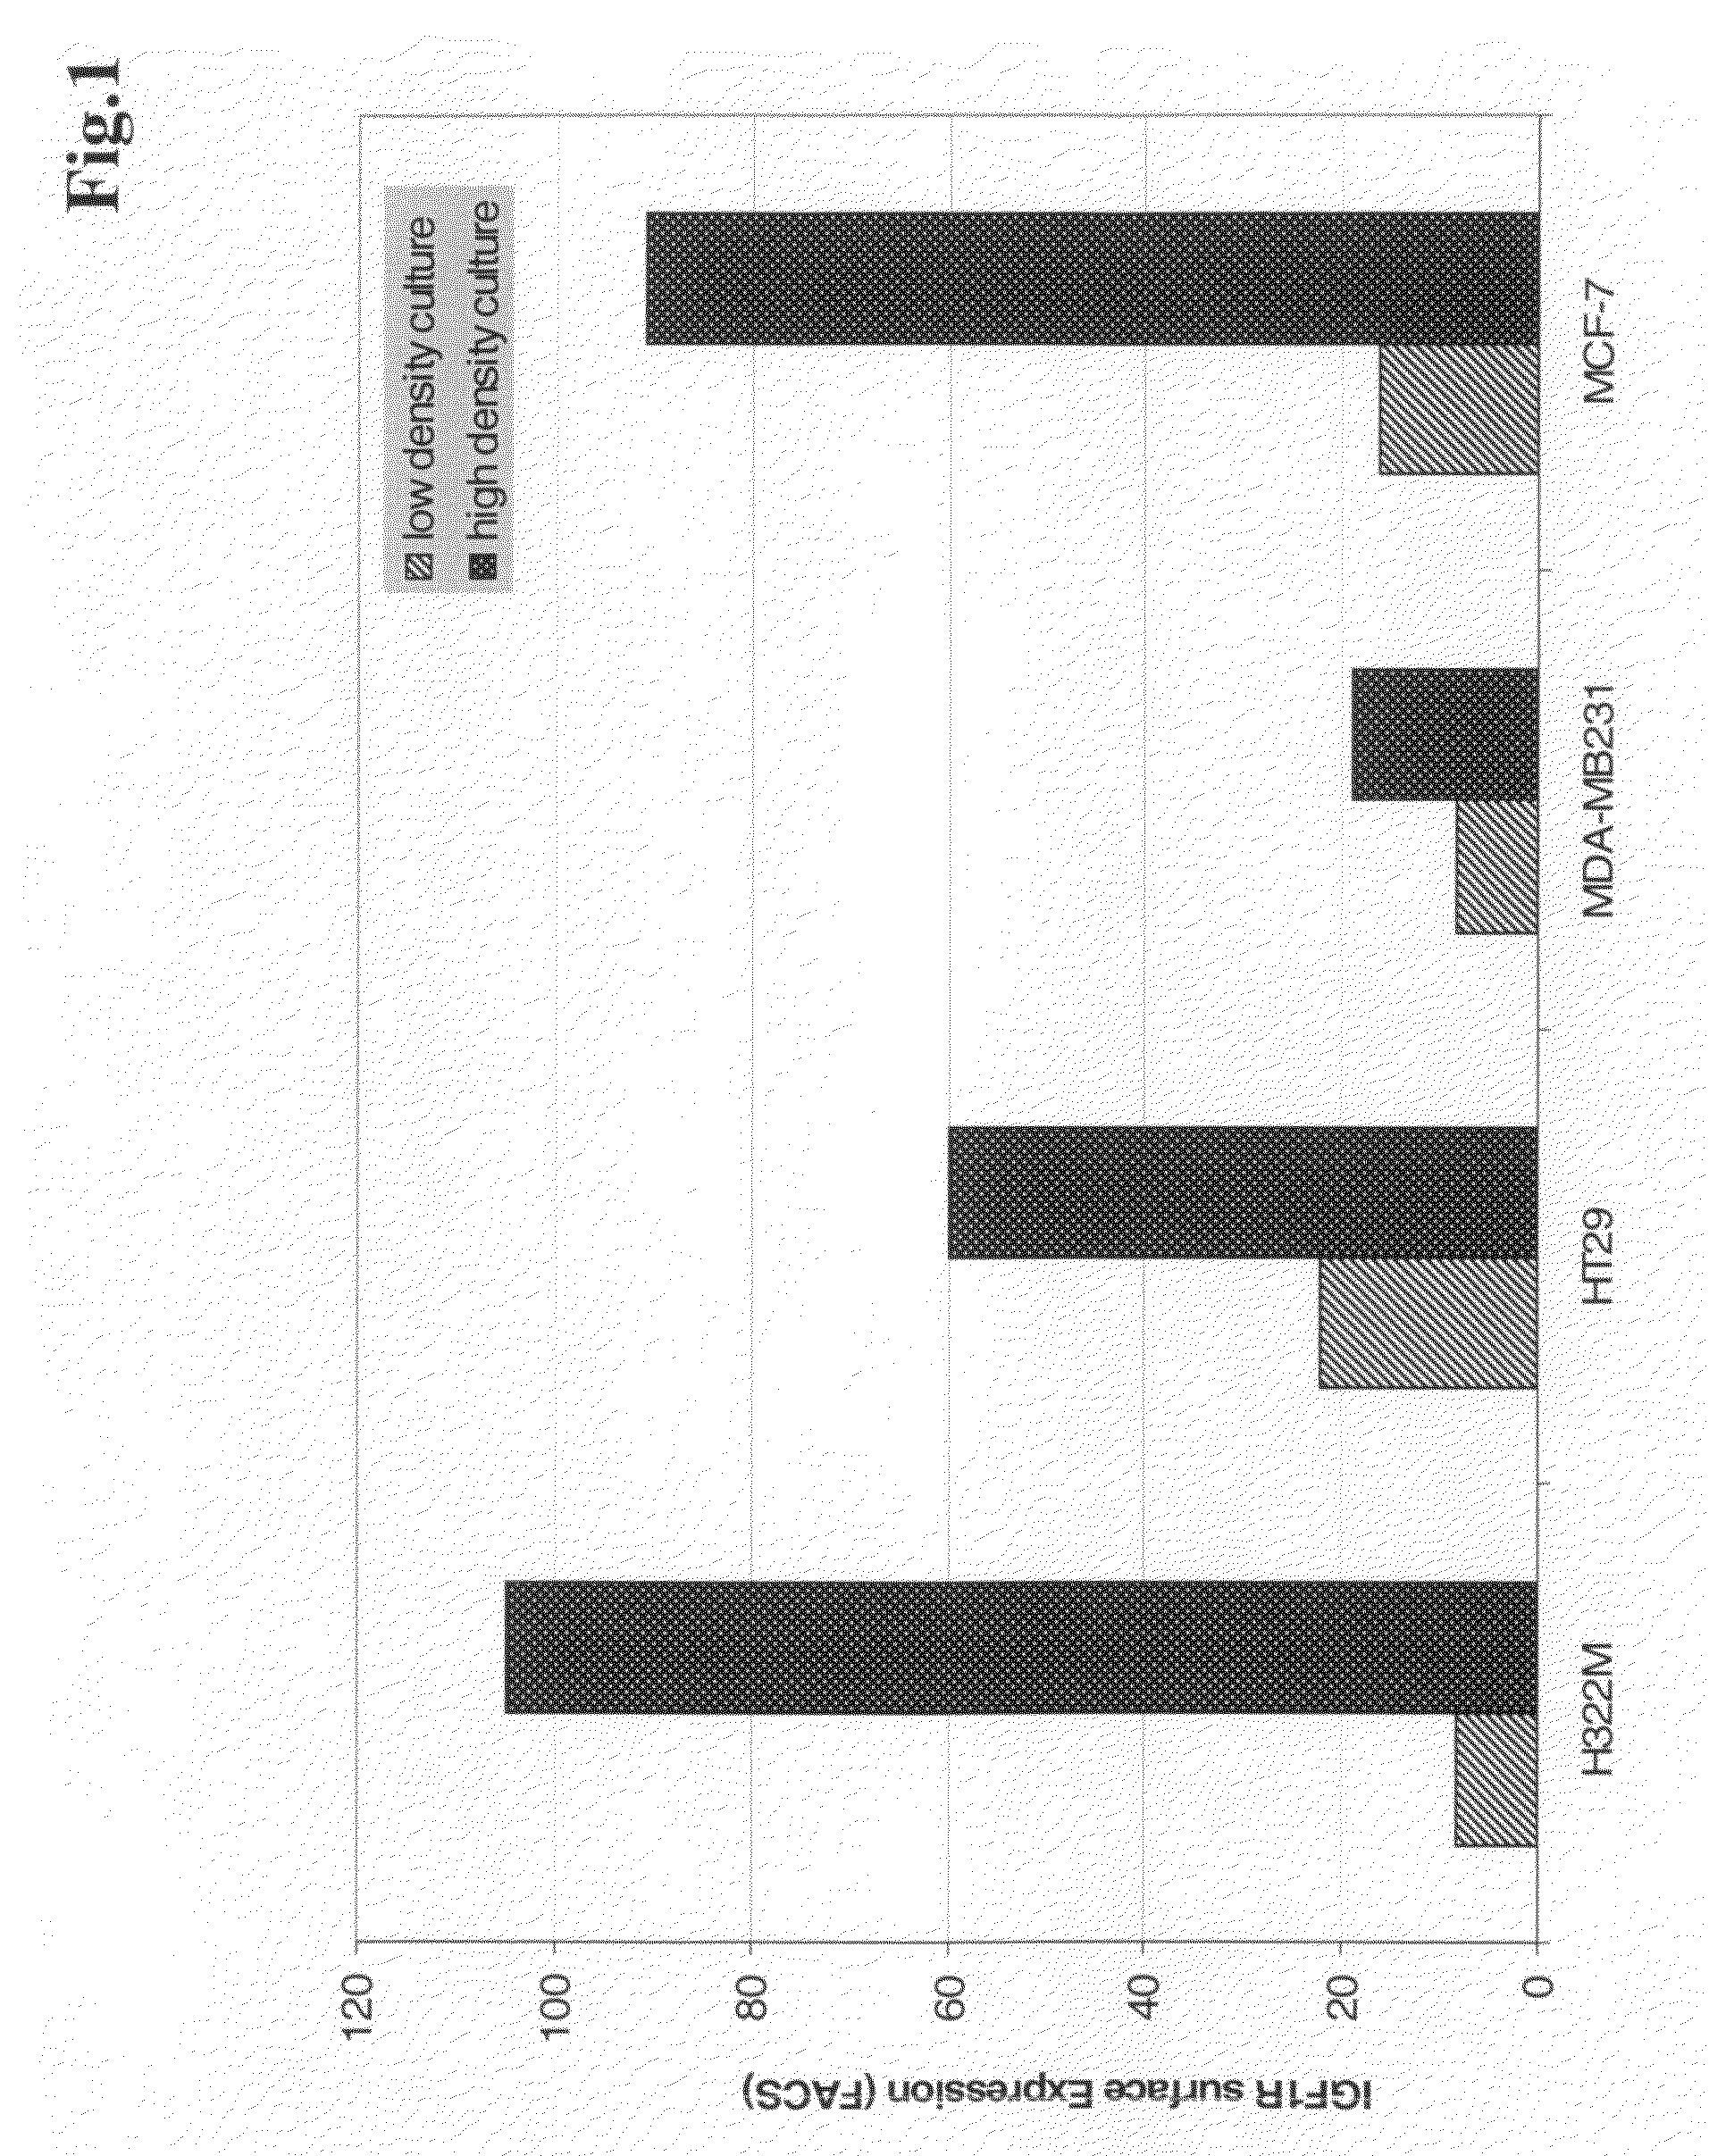 Antibodies against insulin-like growth factor i receptor and uses thereof